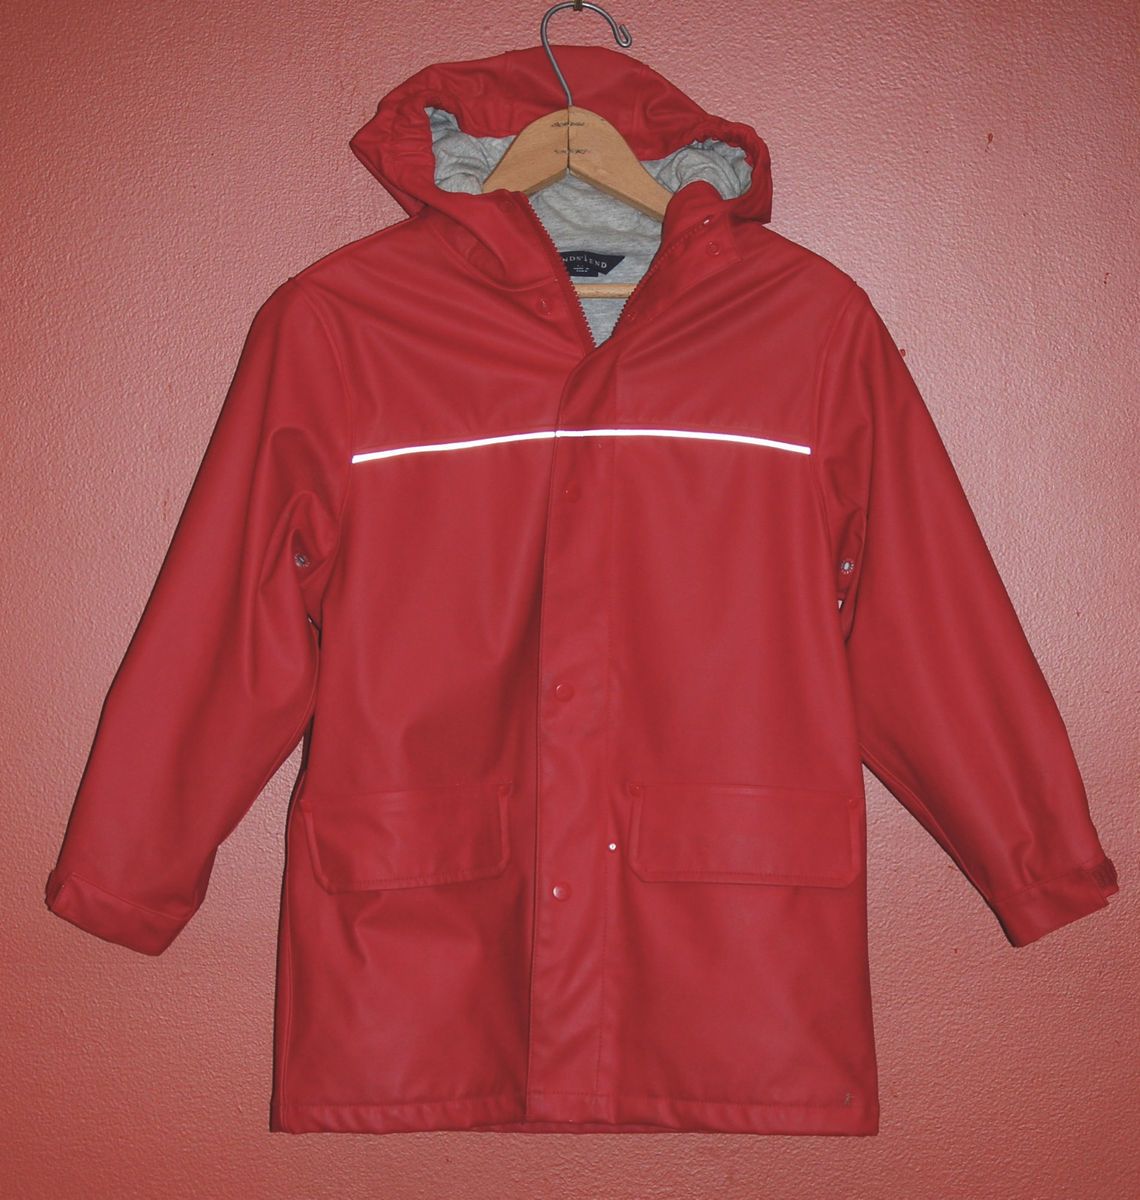 Kids LAND S END Classic Red RAINCOAT Jacket in Childs Size 5 6 Medium